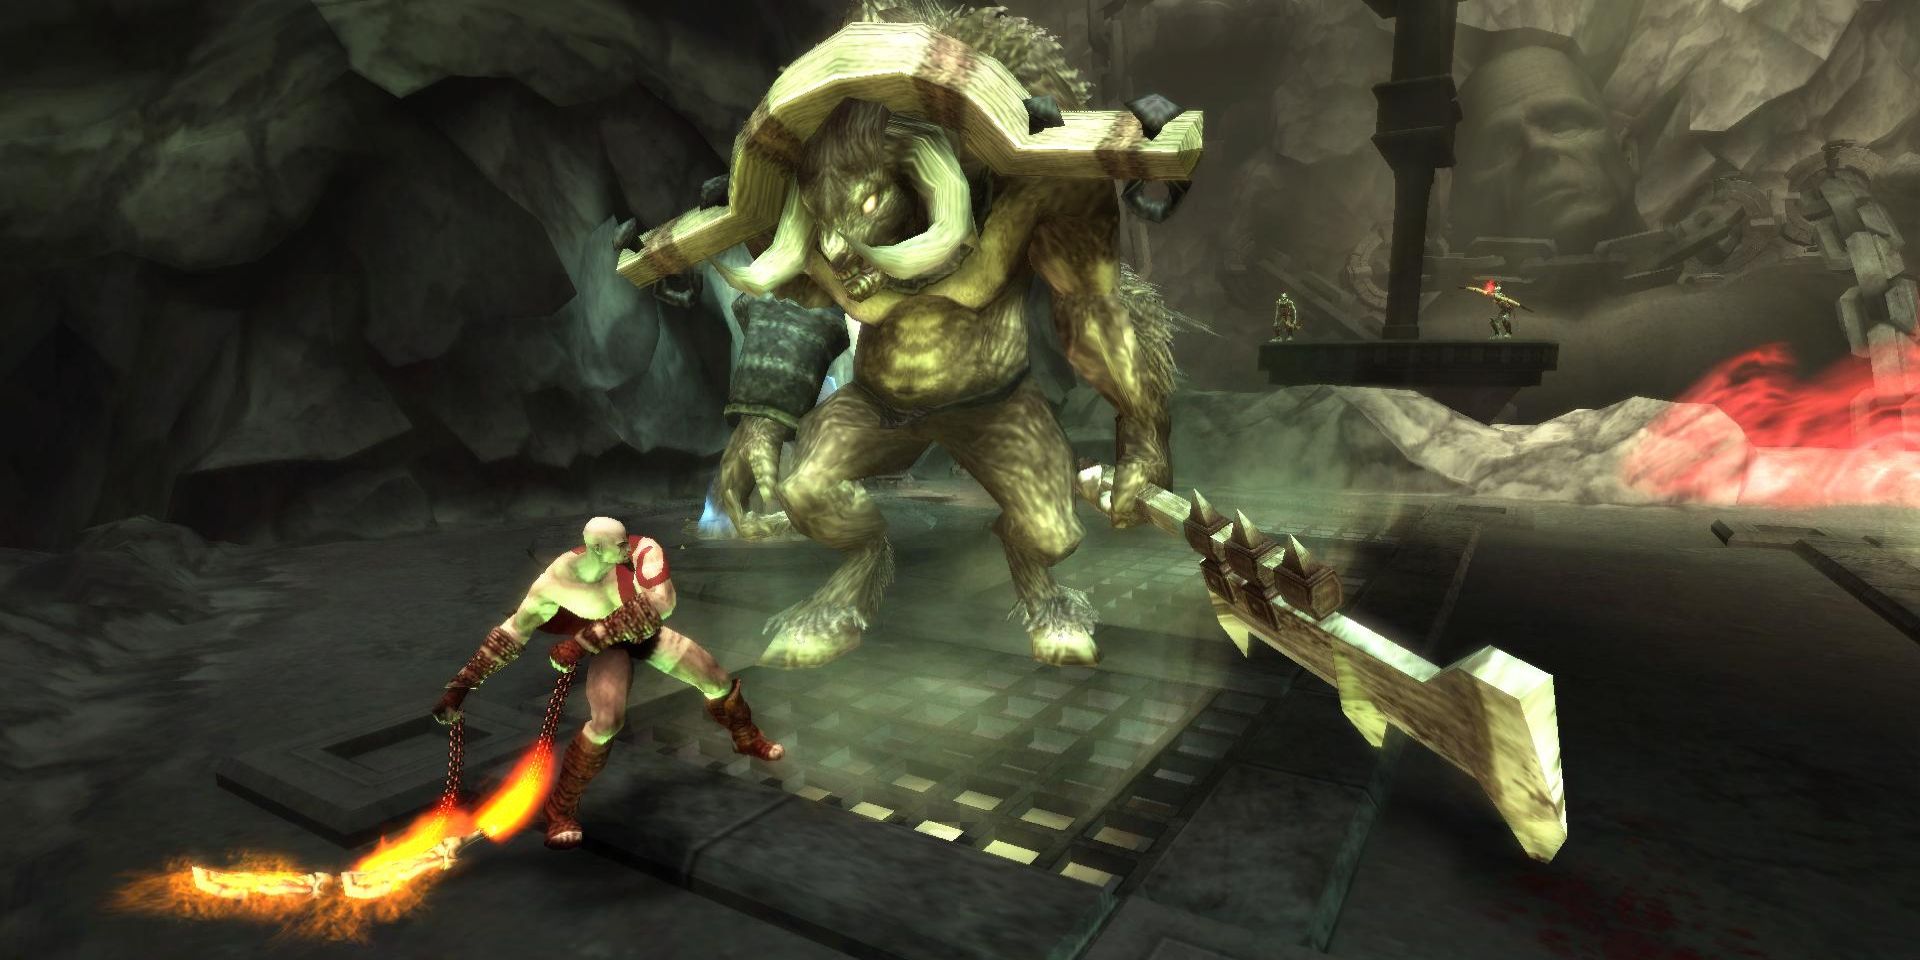 Kratos battles a large monster in a dungeon in God of War: Chains of Olympus.